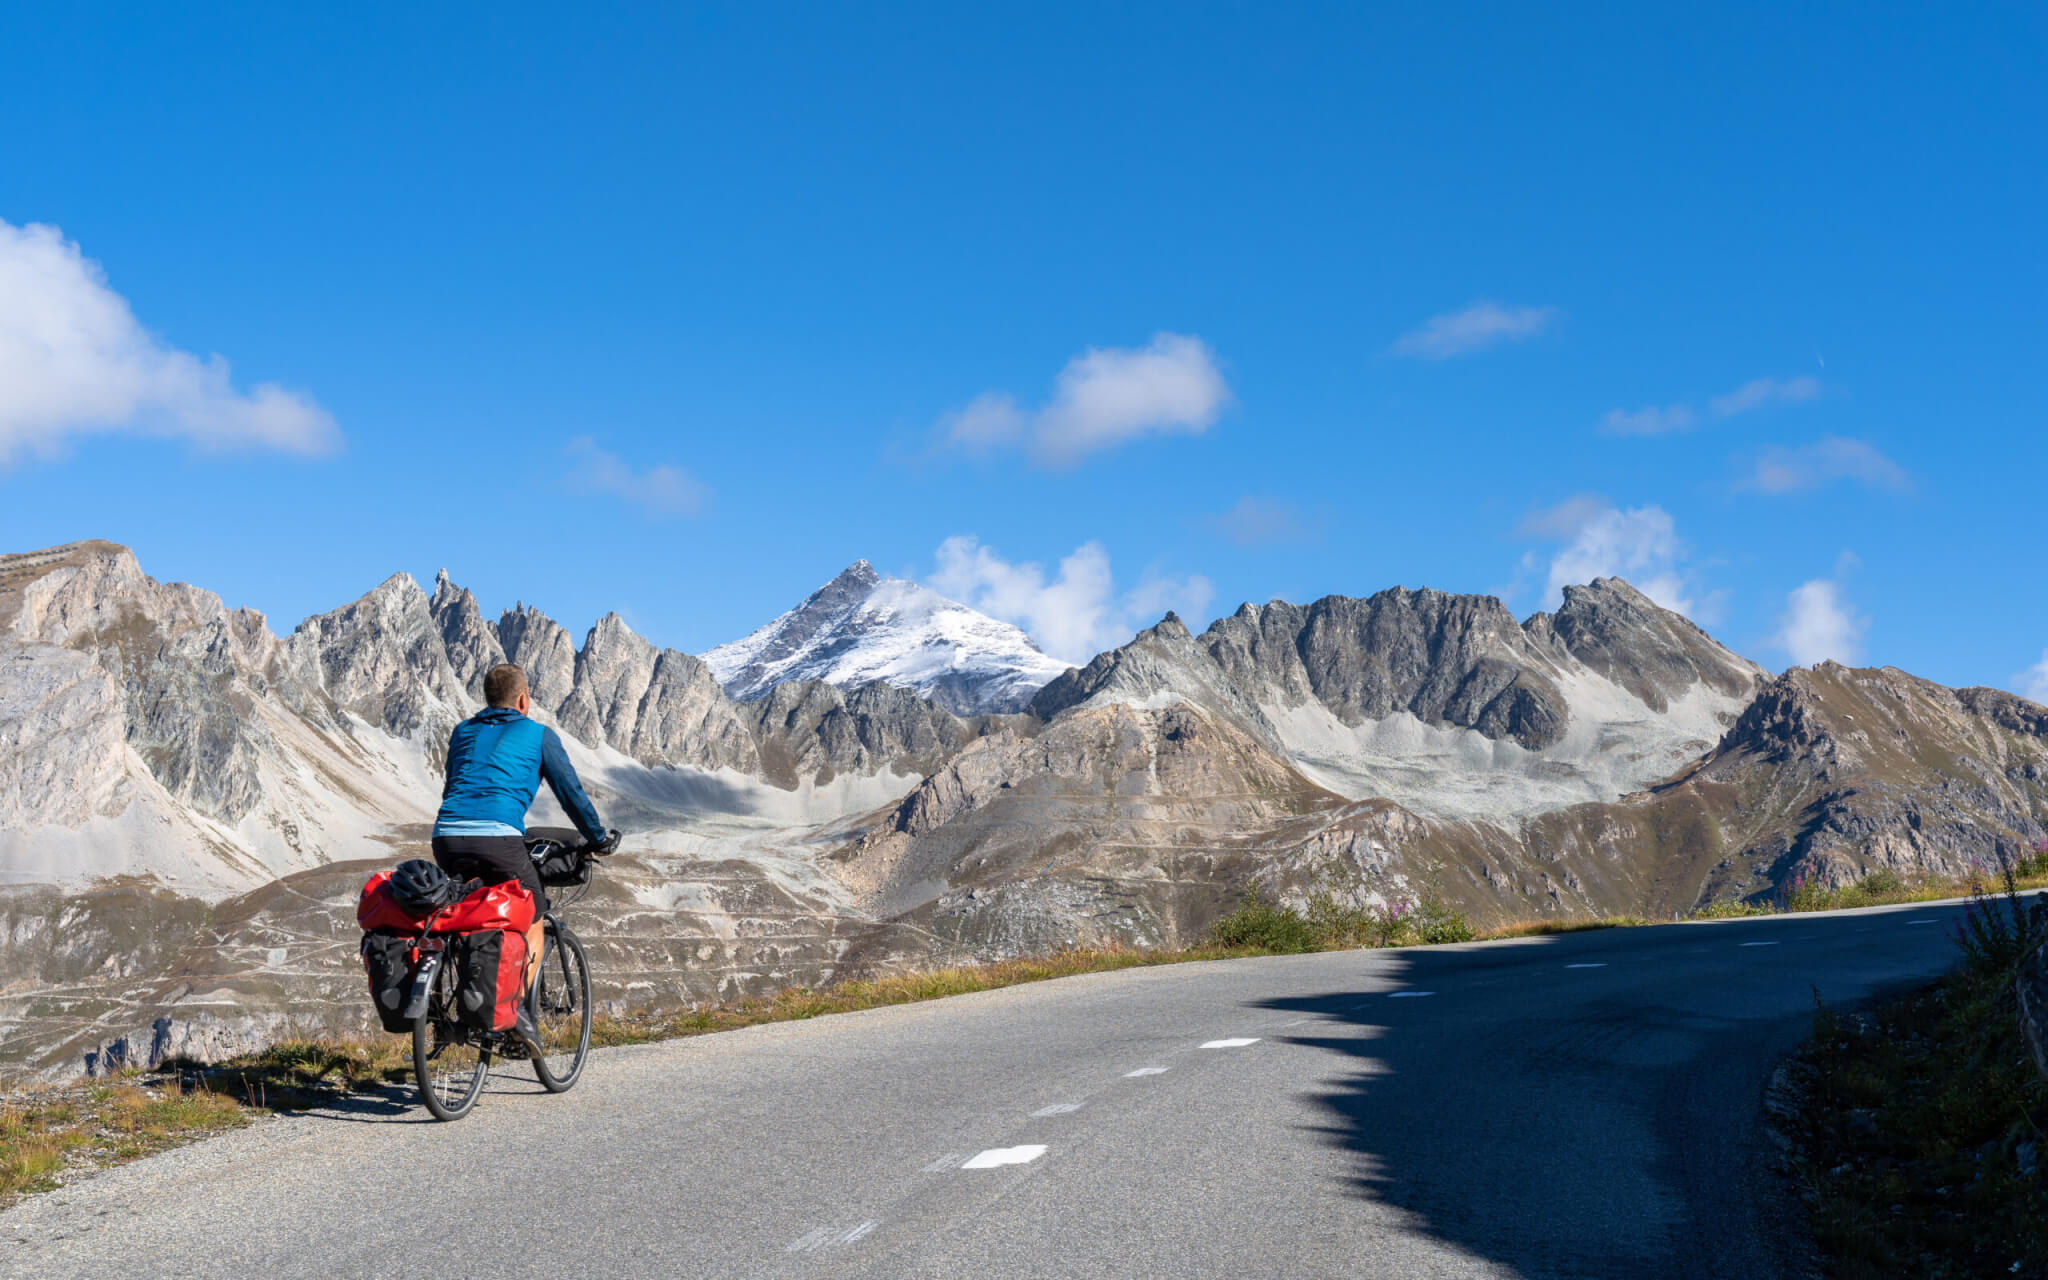 A cyclist riding on the Col d'Iseran, a high mountain pass in the Savoie department of France. The Col d'Iseran is part of the Grande Route des Grandes Alpes,